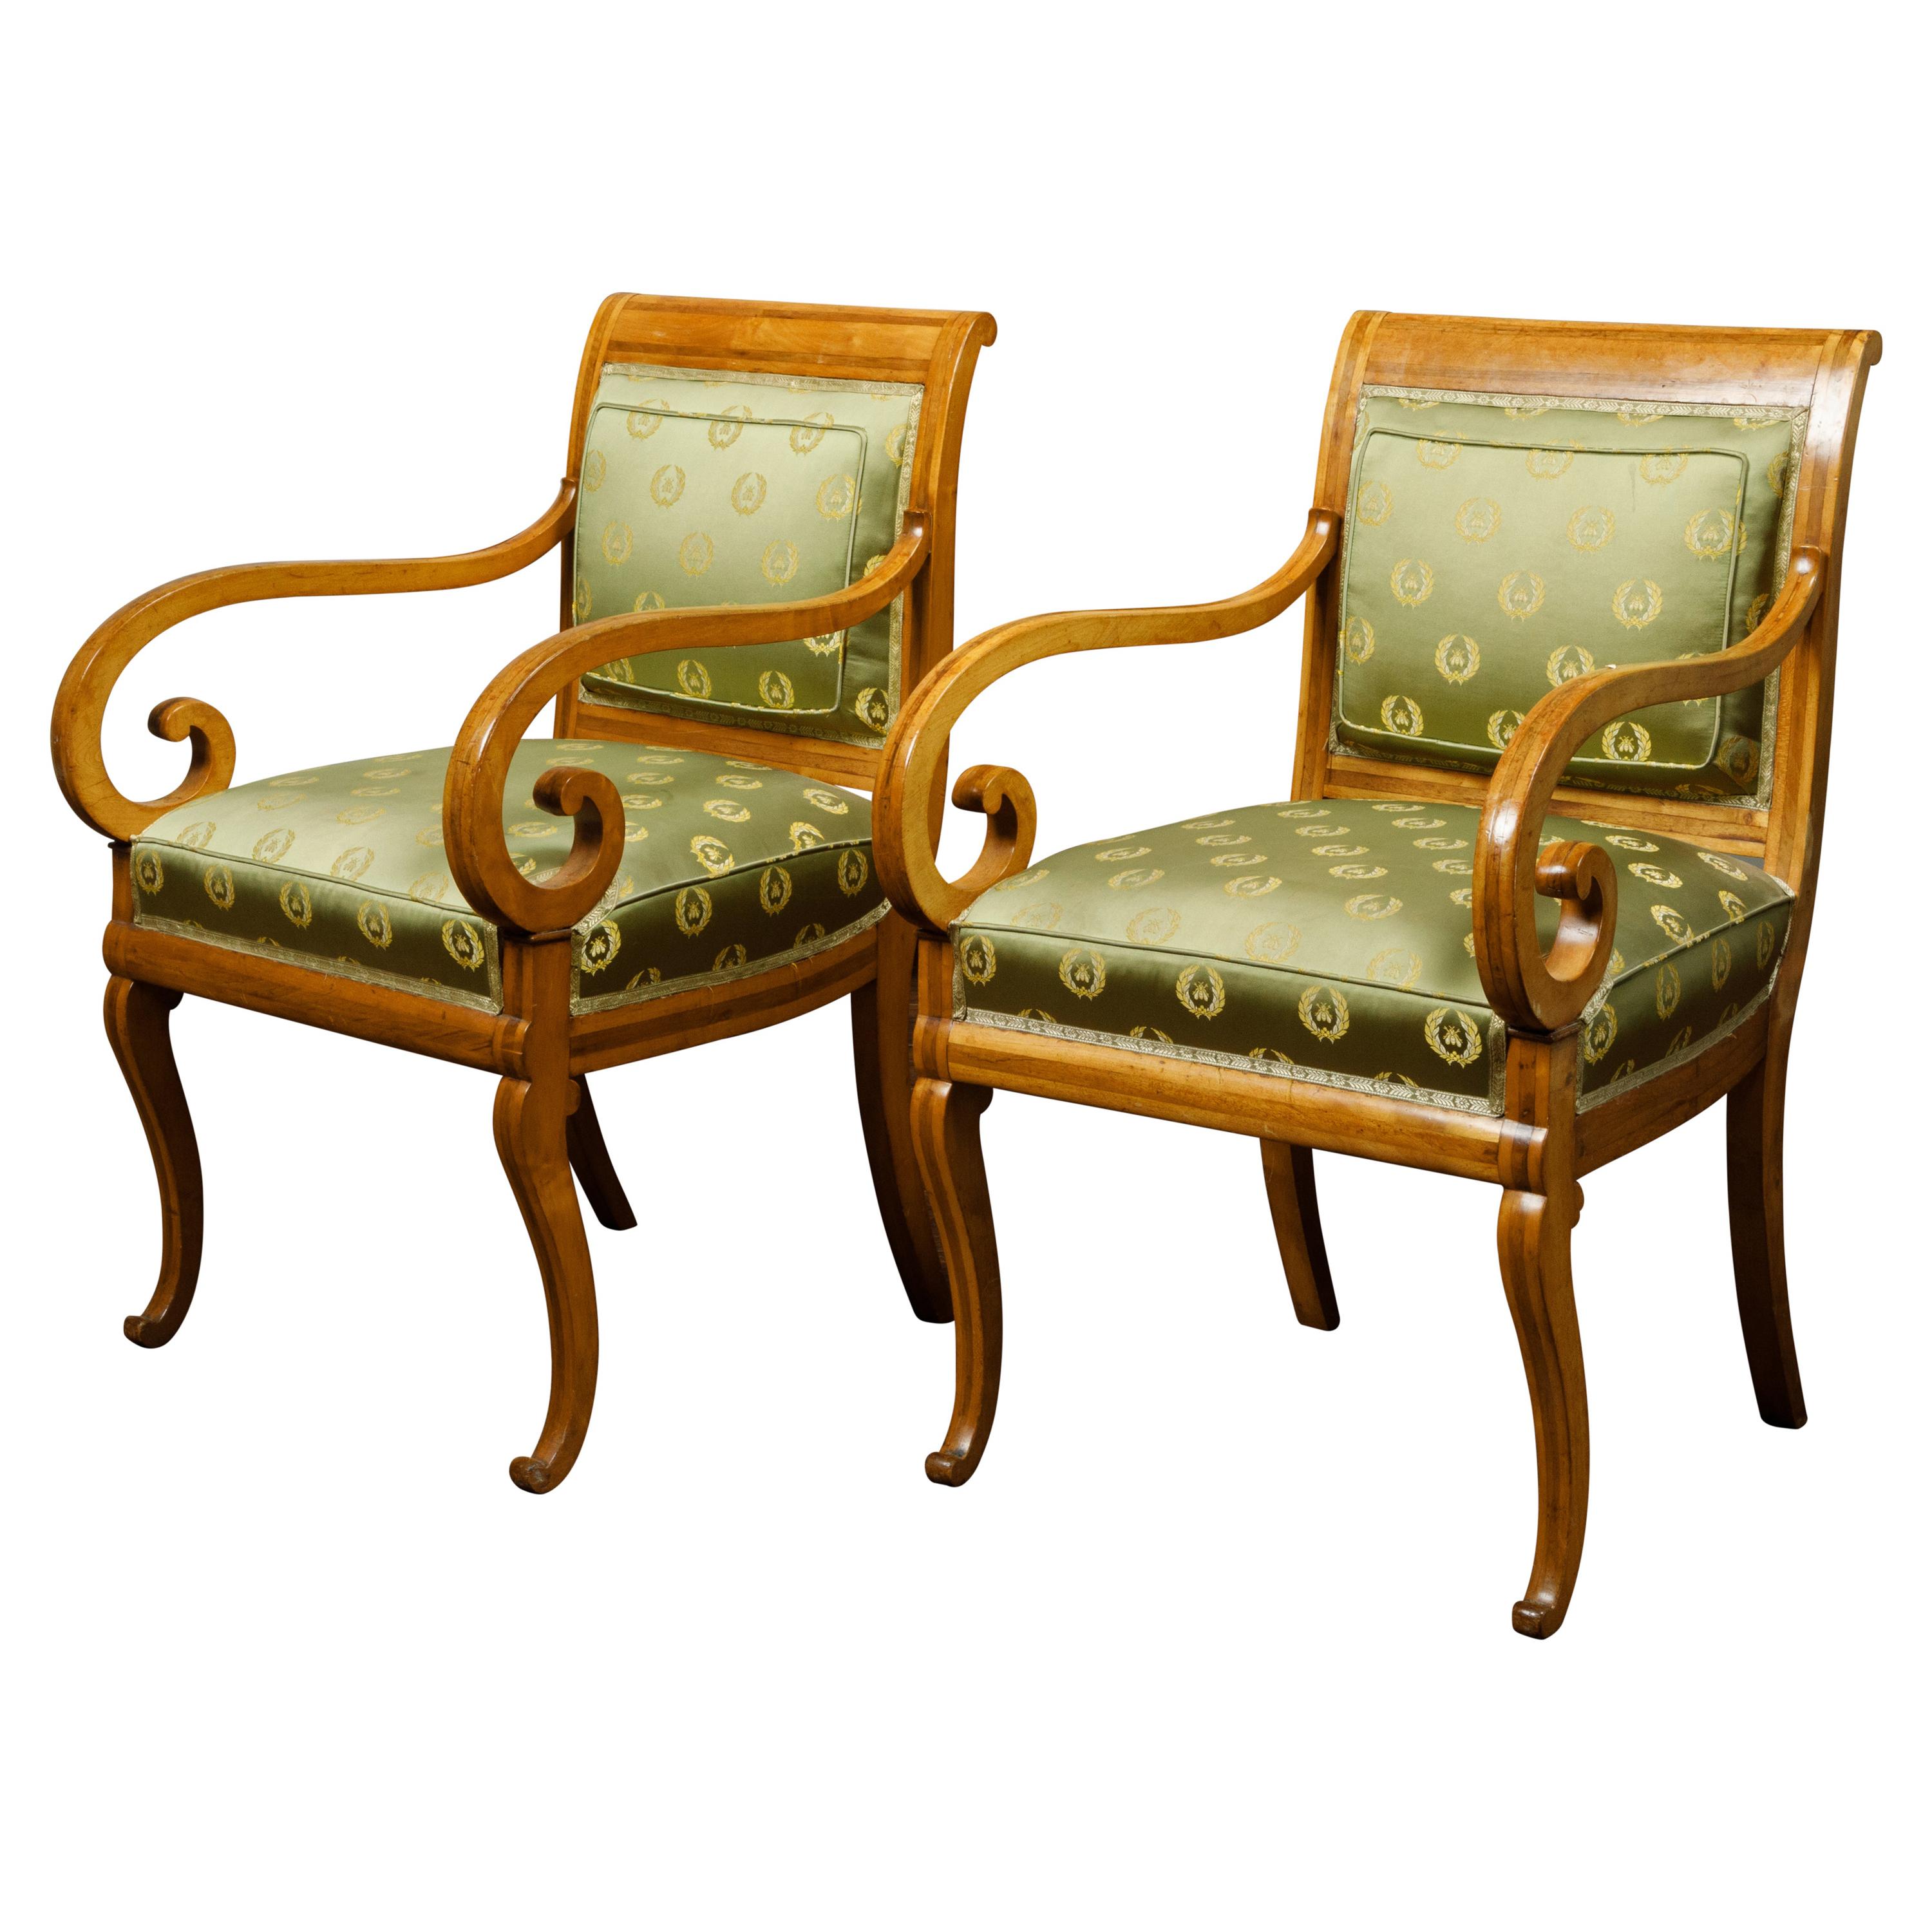 Pair of English 1830s Regency Walnut Upholstered Armchairs with Scrolling Arms